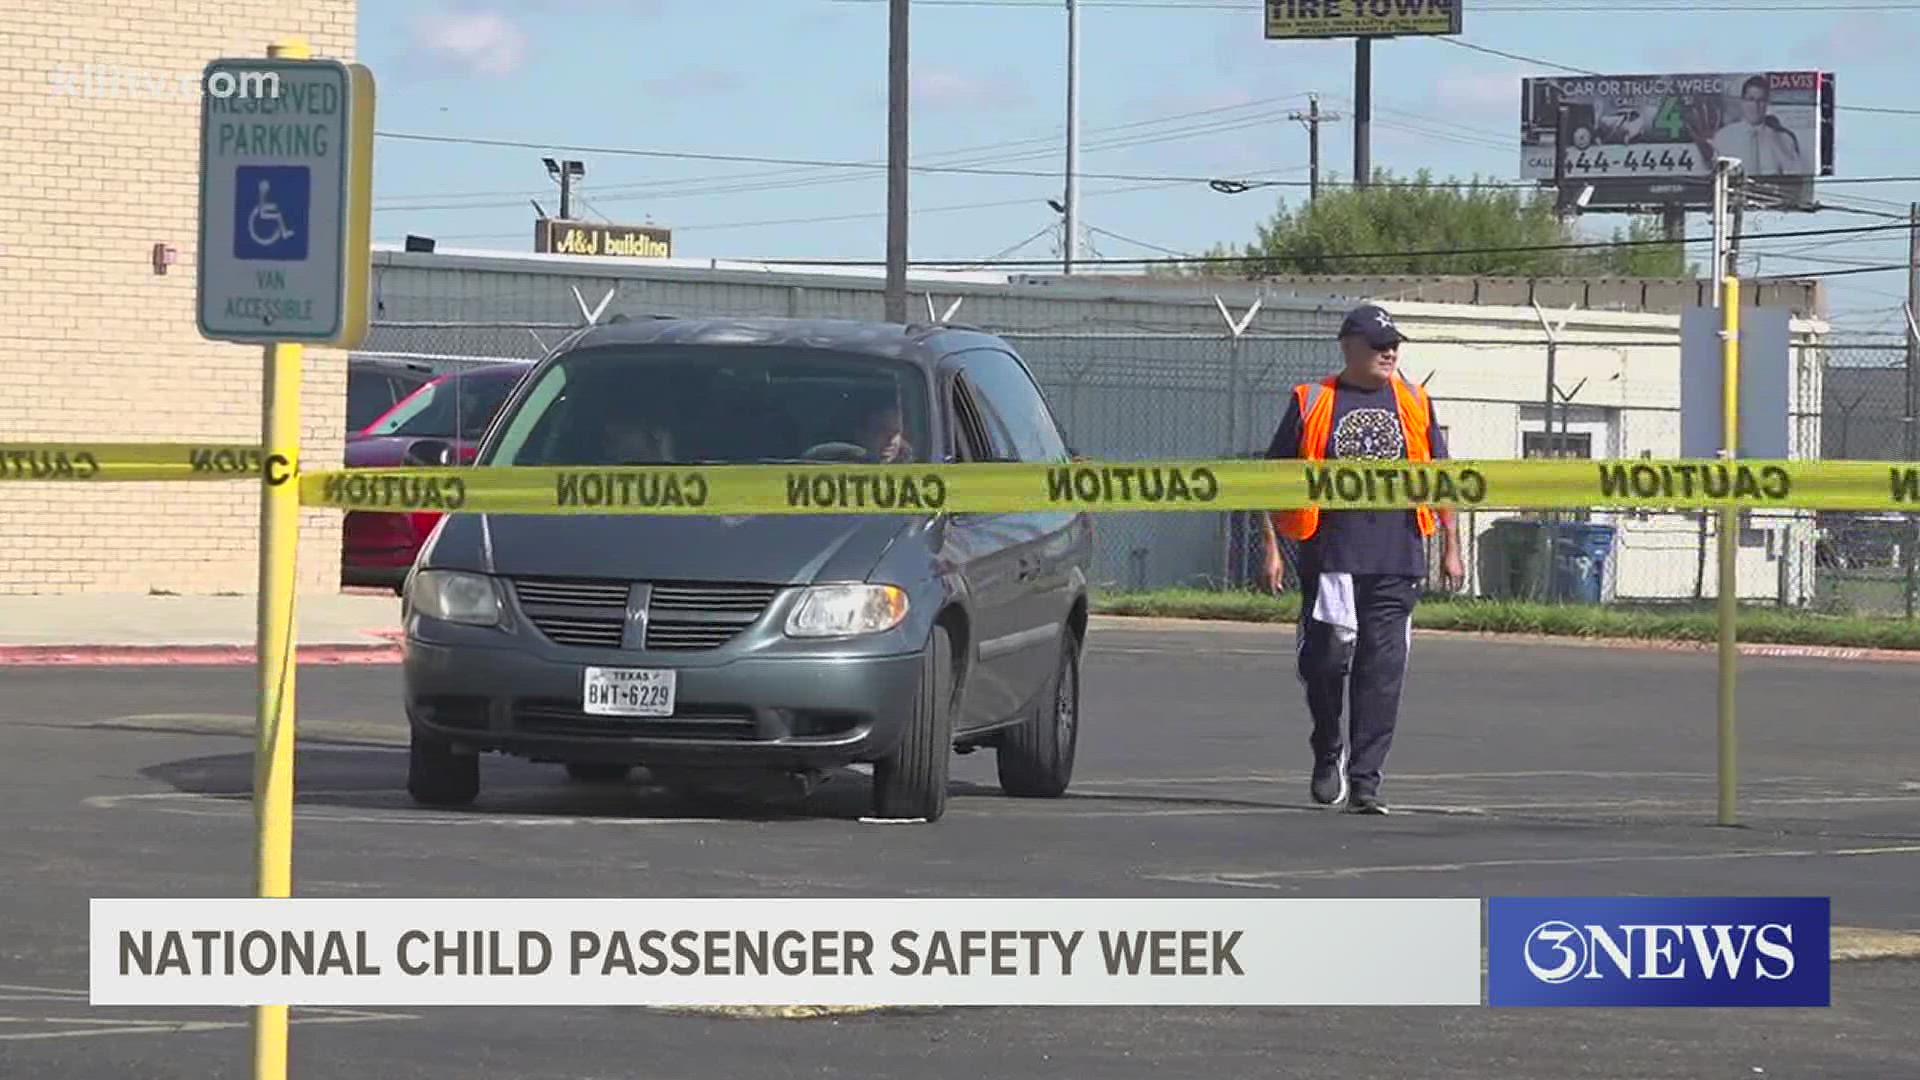 Beard said, they have been offering these services all week during National Child Passenger Seat Safety Week and have helped over 200 families.